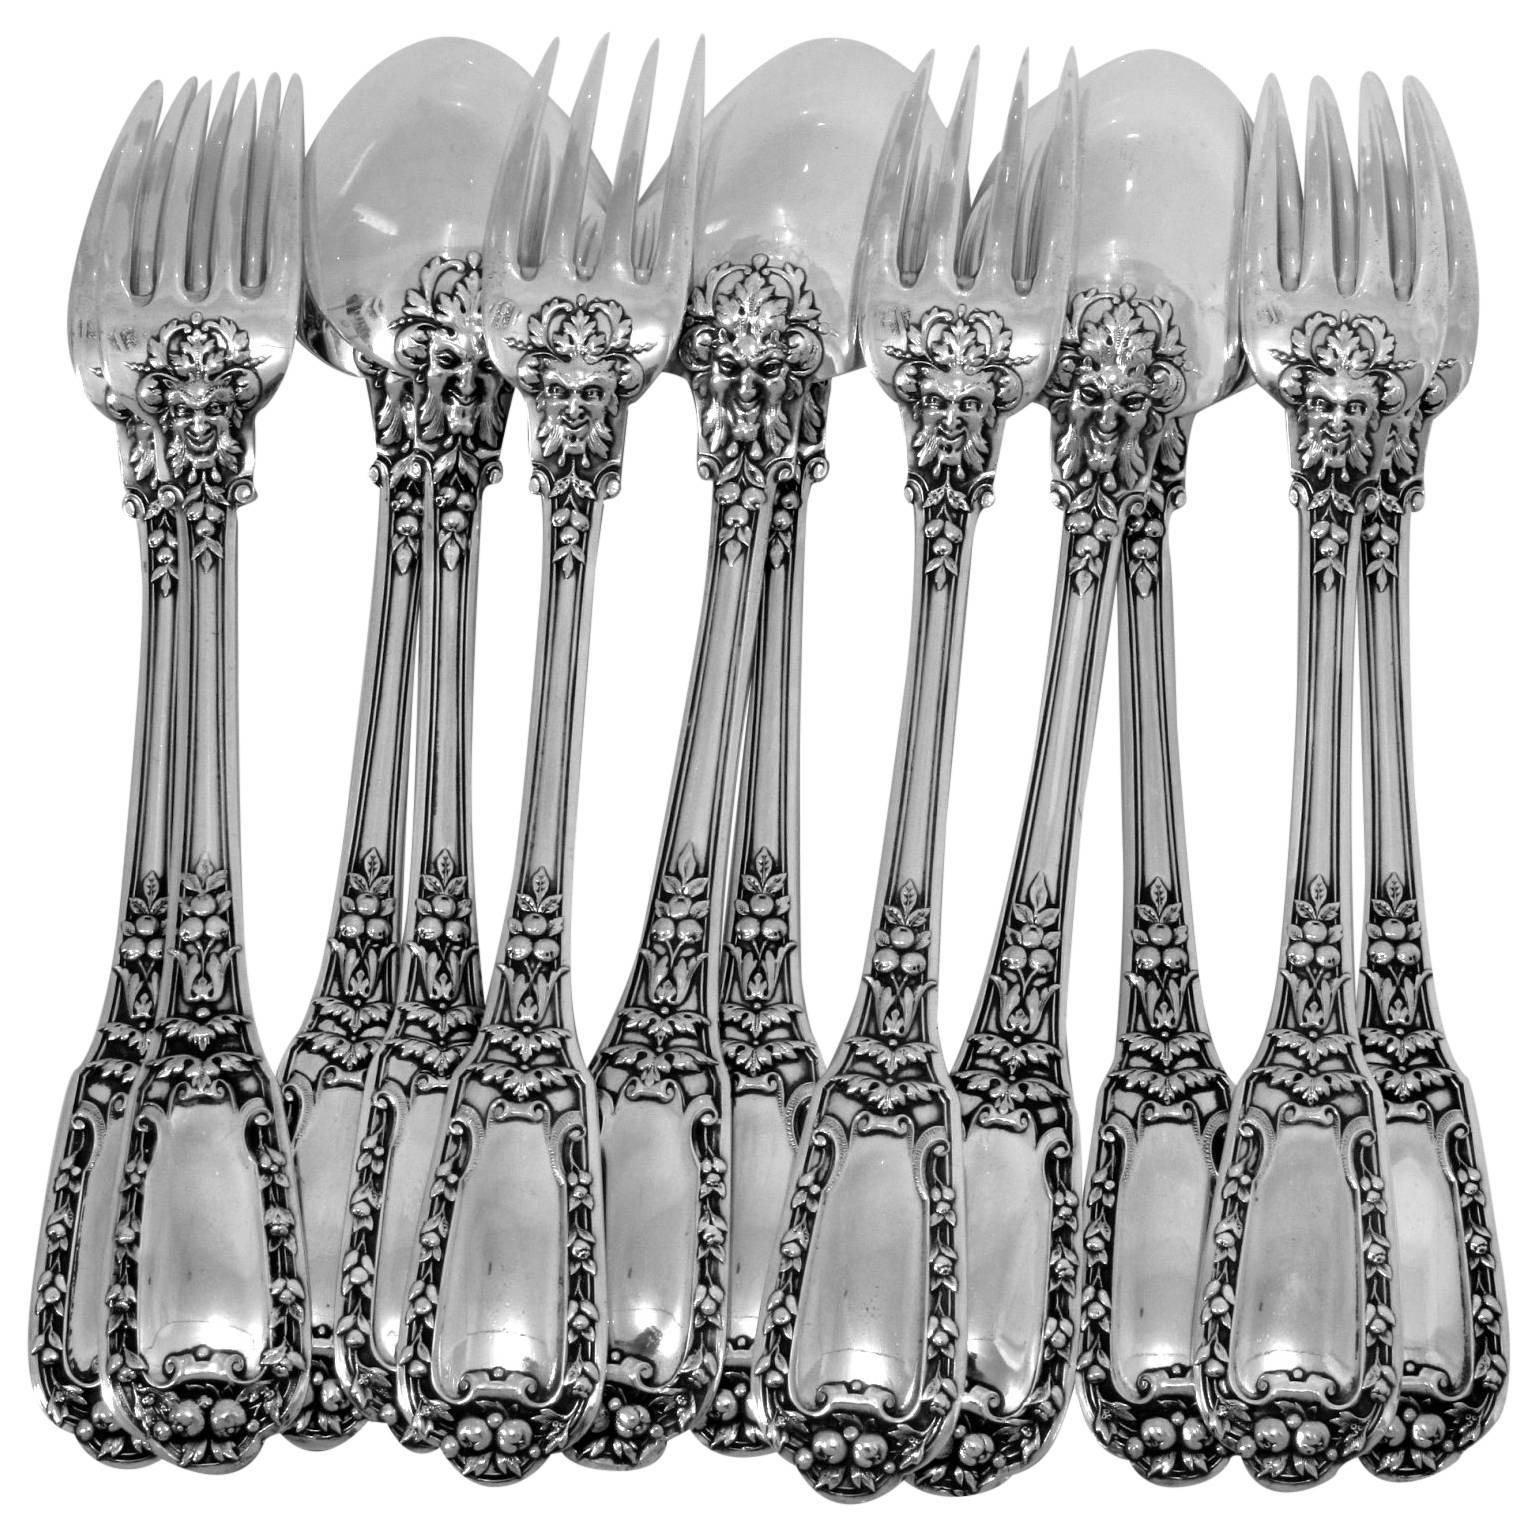 Soufflot Gorgeous French Sterling Silver Dinner Flatware Set 12 pc Mascarons For Sale